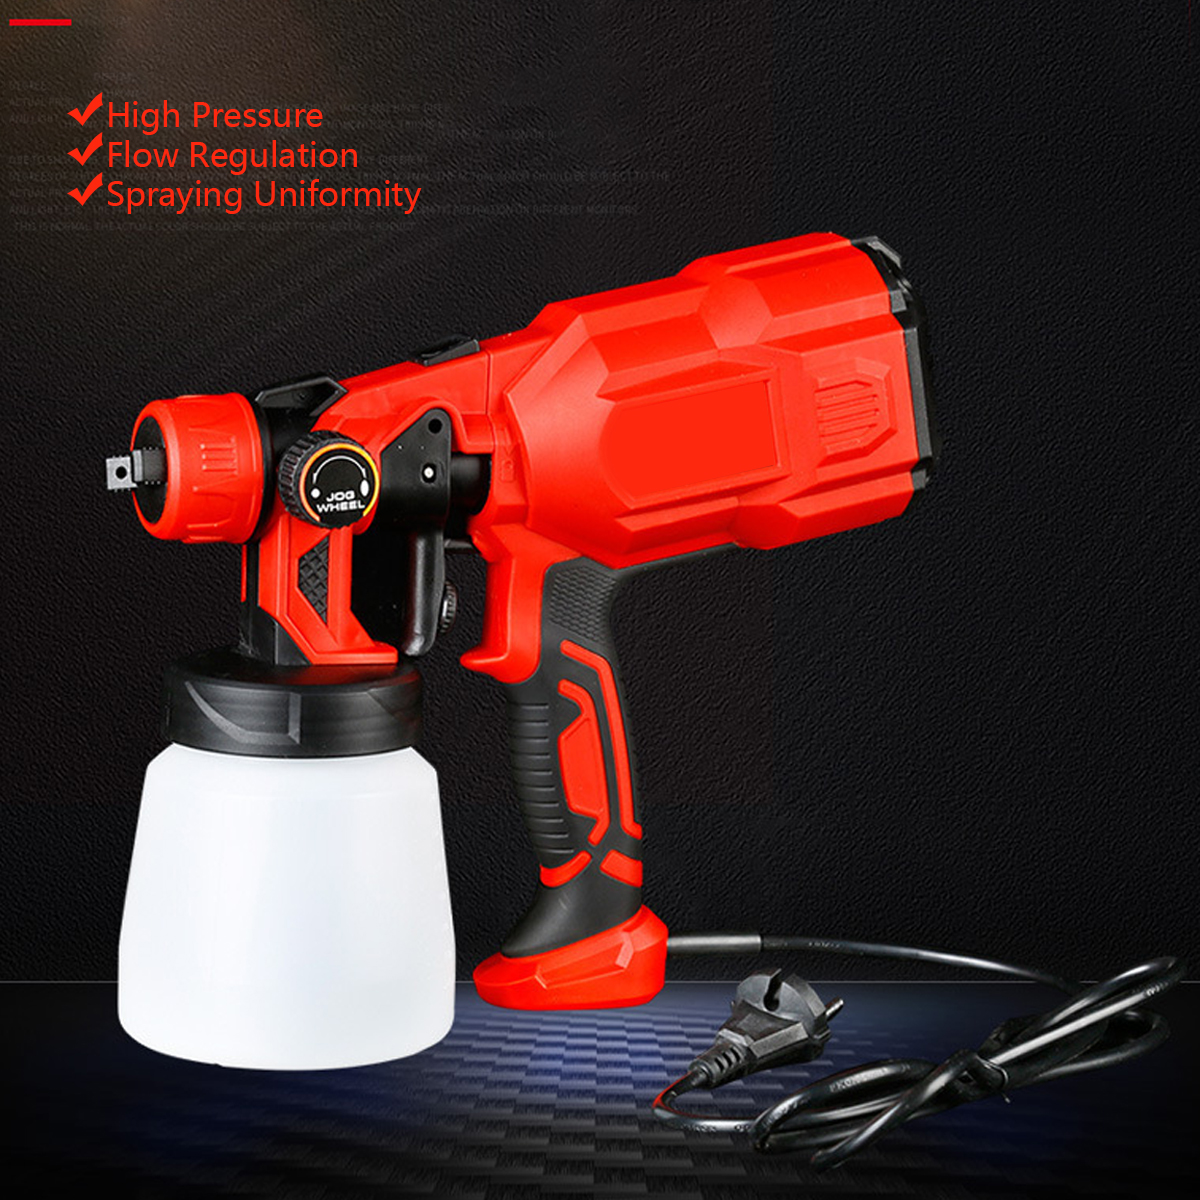 Removable-Electric-Paint-Spray-Guns-High-Pressure-Gravity-Feed-Kit-Speed-Regulator-Paint-Tools-Prime-1873508-2